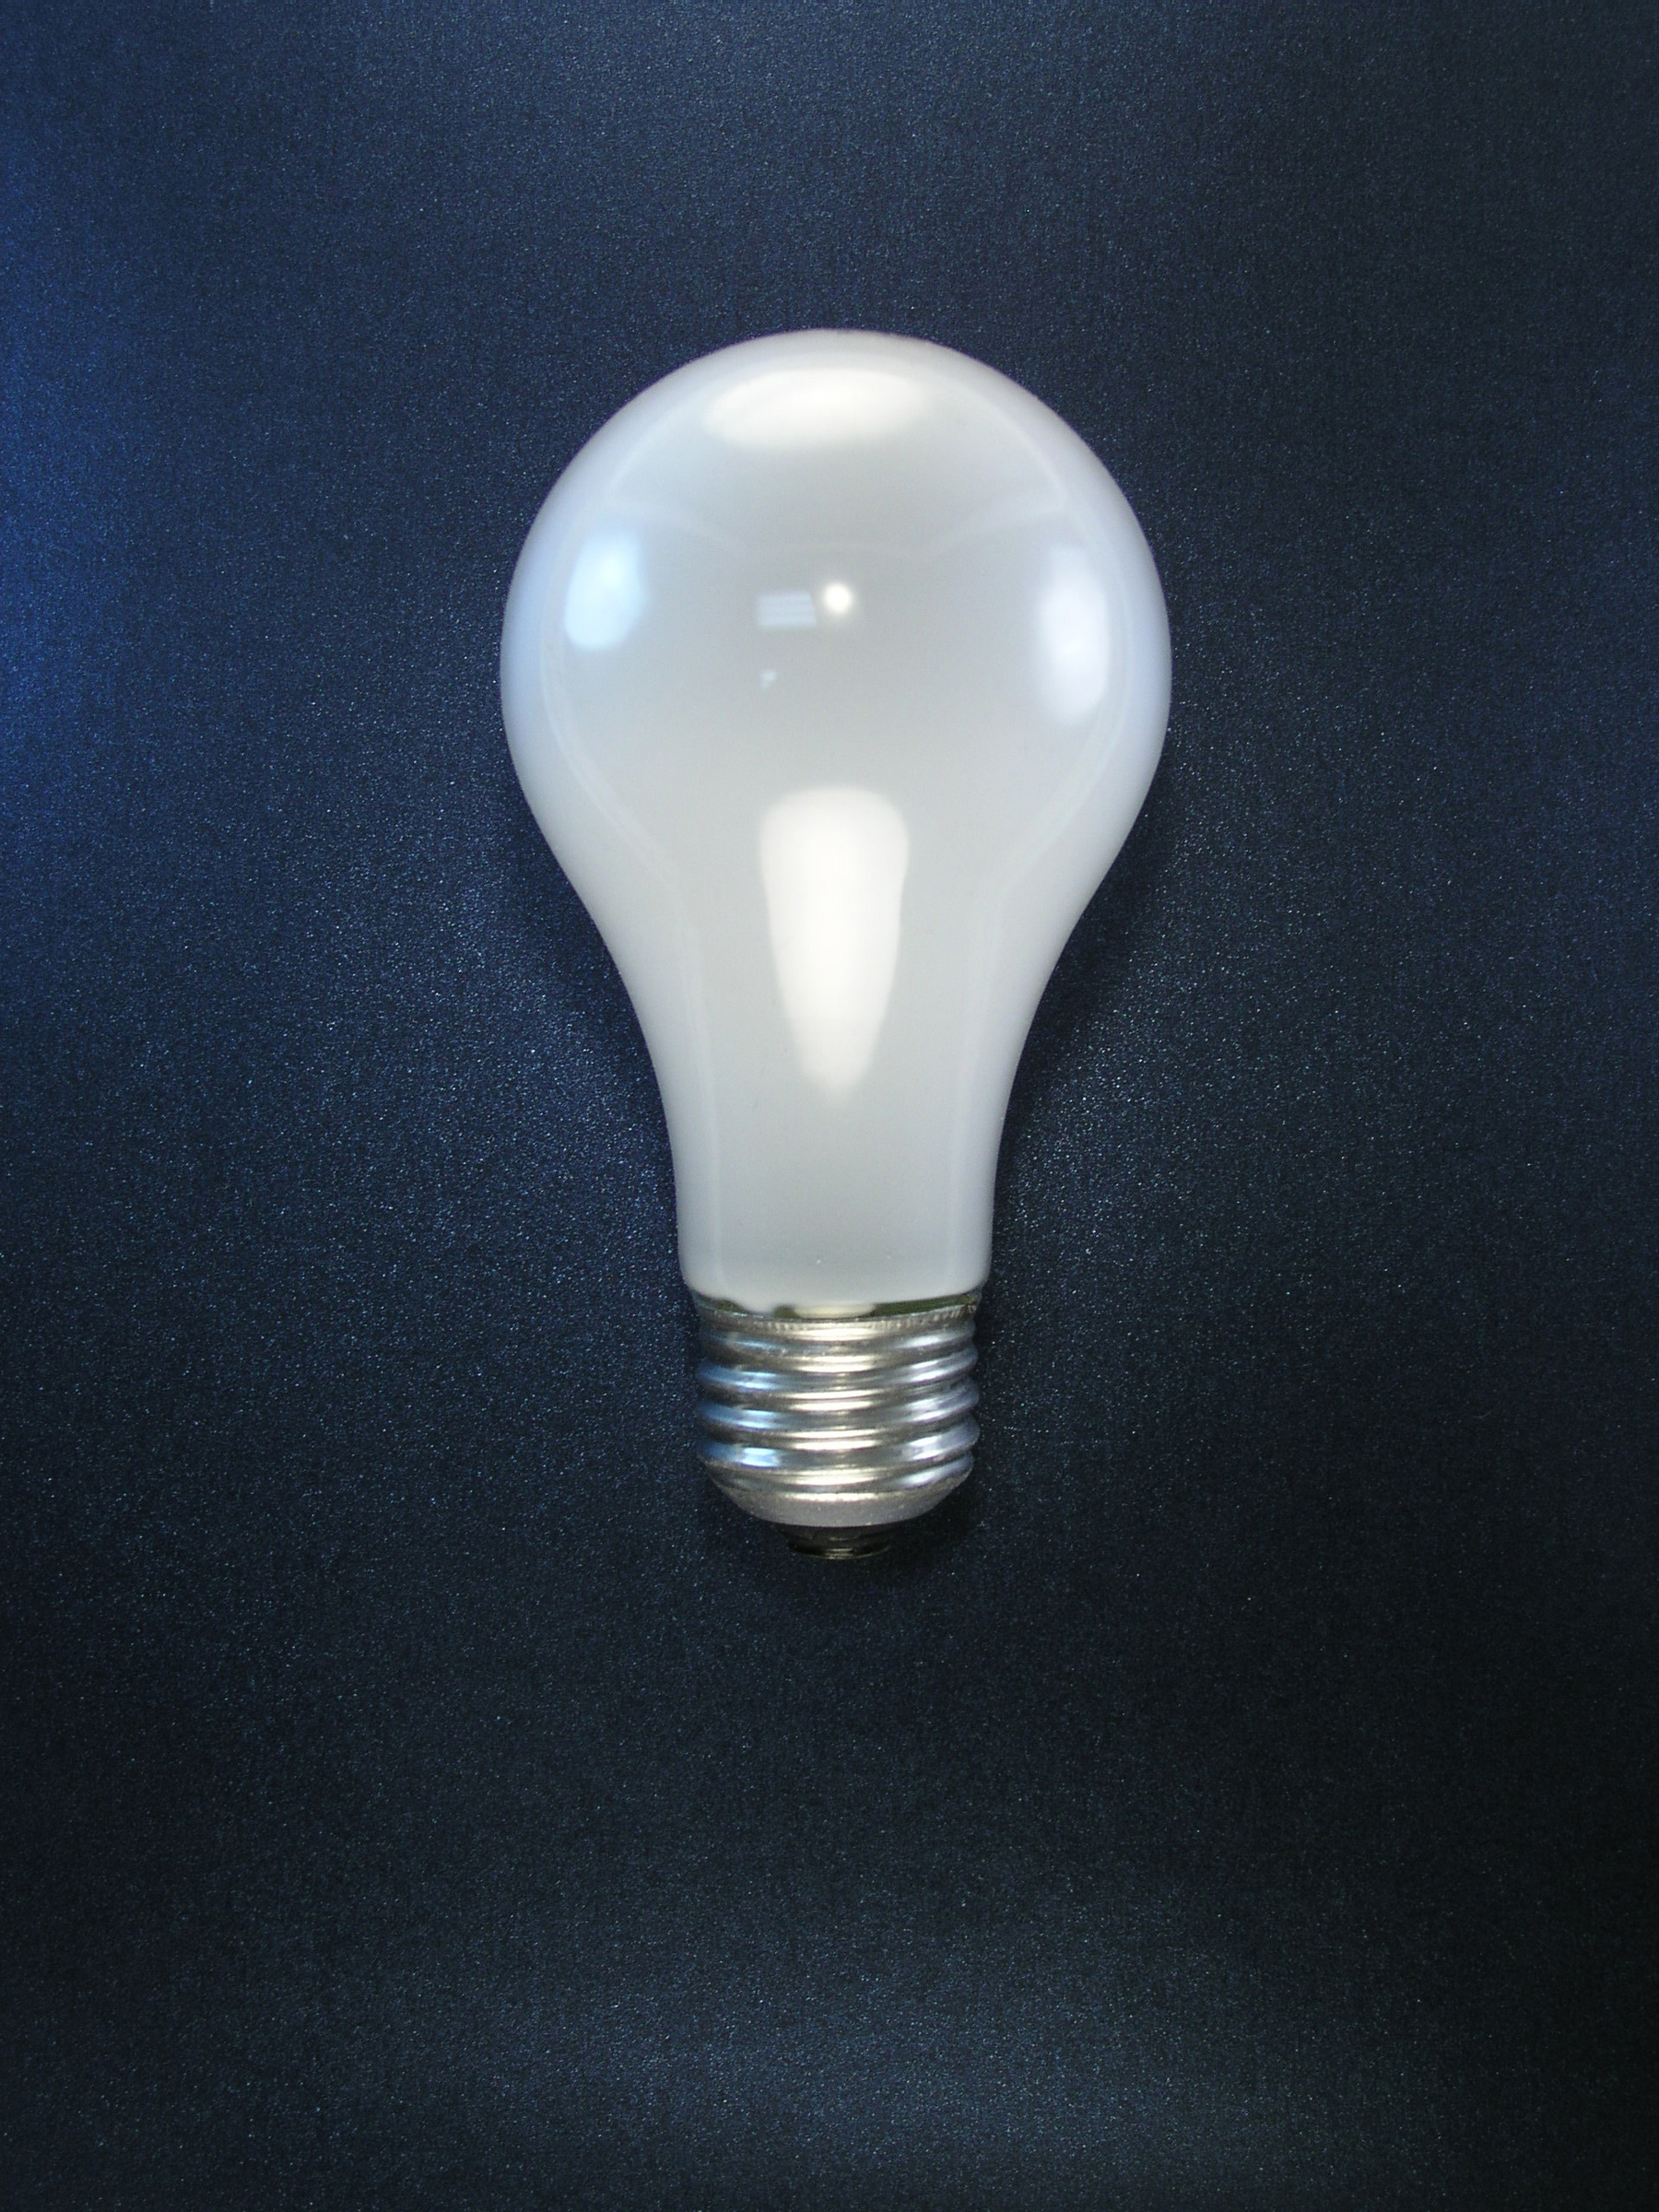 Traditional Incandescent Light Bulbs Phased Out